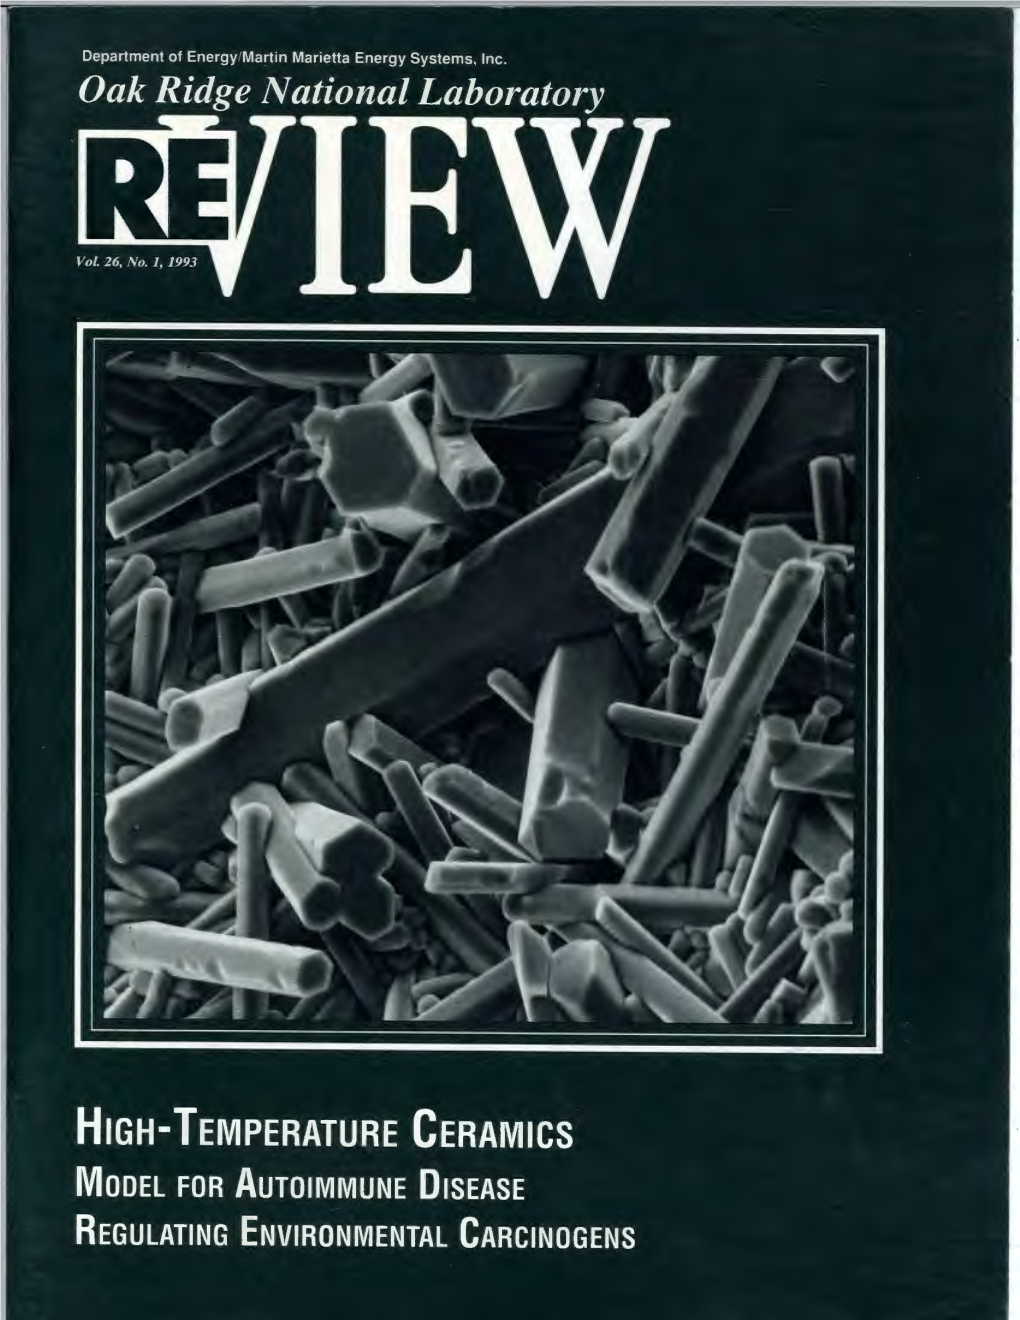 ORNL Review in the Summer of 1992